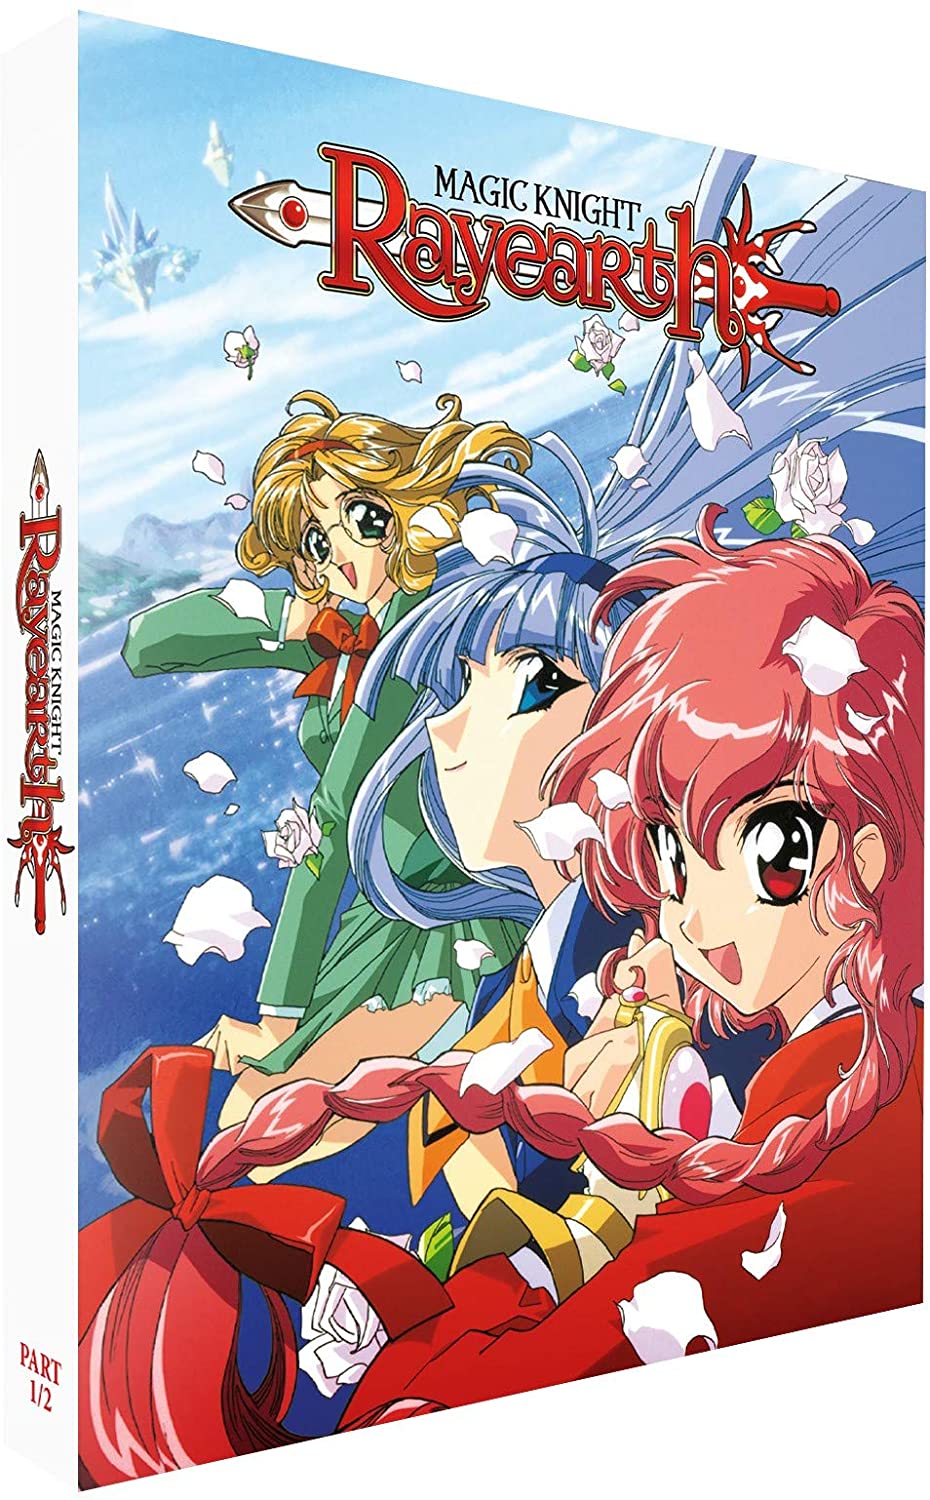 New Magic Knight Rayearth and Fairy Tail Released Monday  News  Anime  News Network